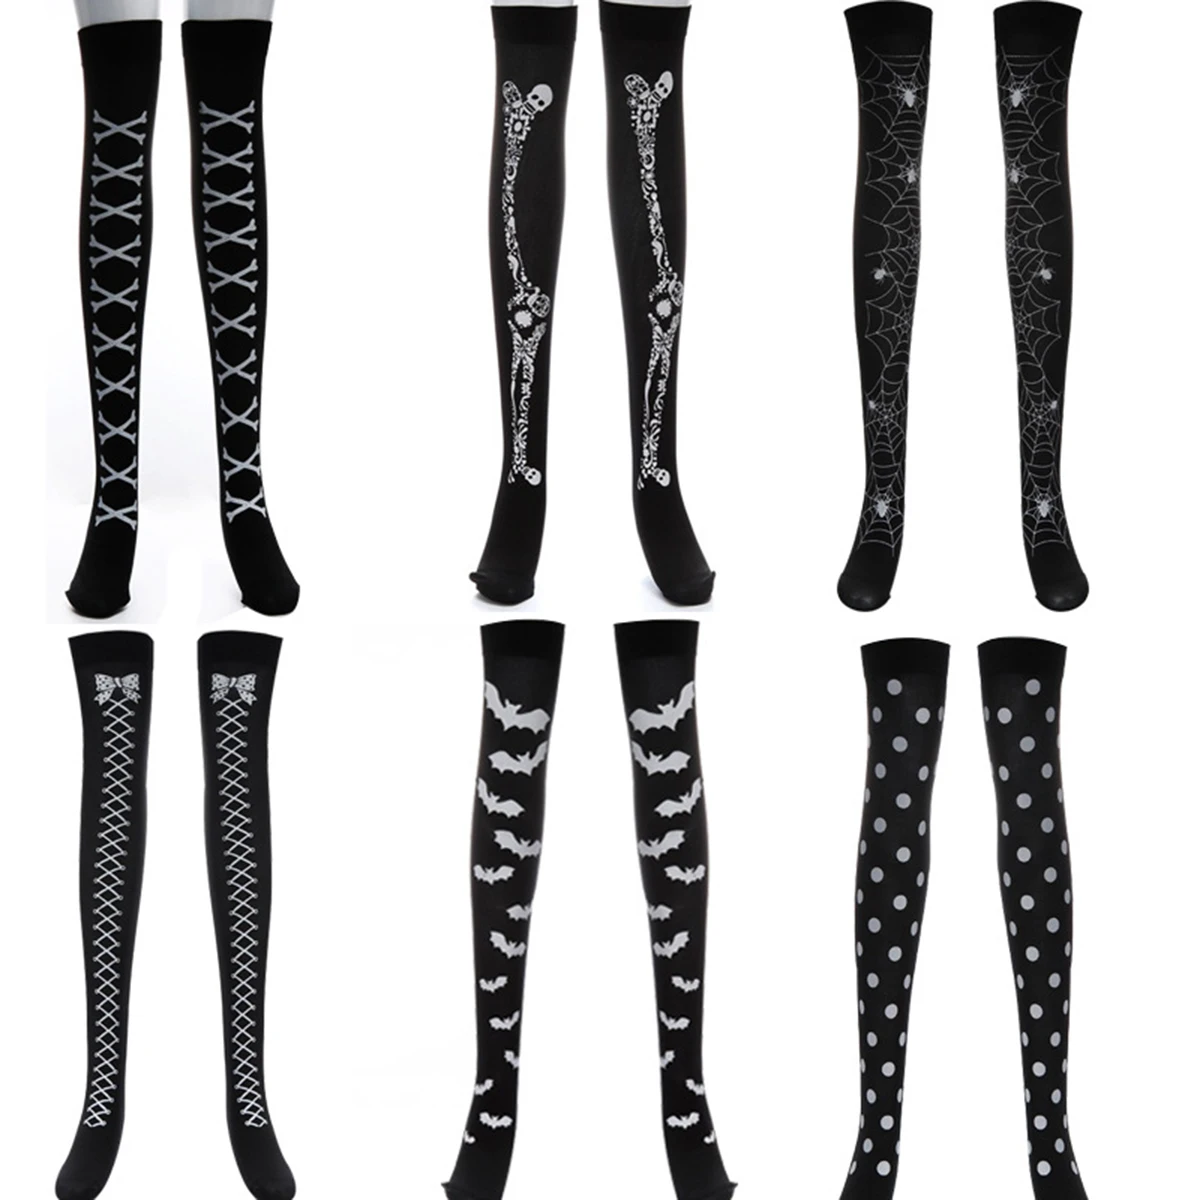 

Halloween Cosplay Hose Long Socks Skeleton Frame Printed Stockings Goth Horror Ghost Trick Masquerade Props Party Costume